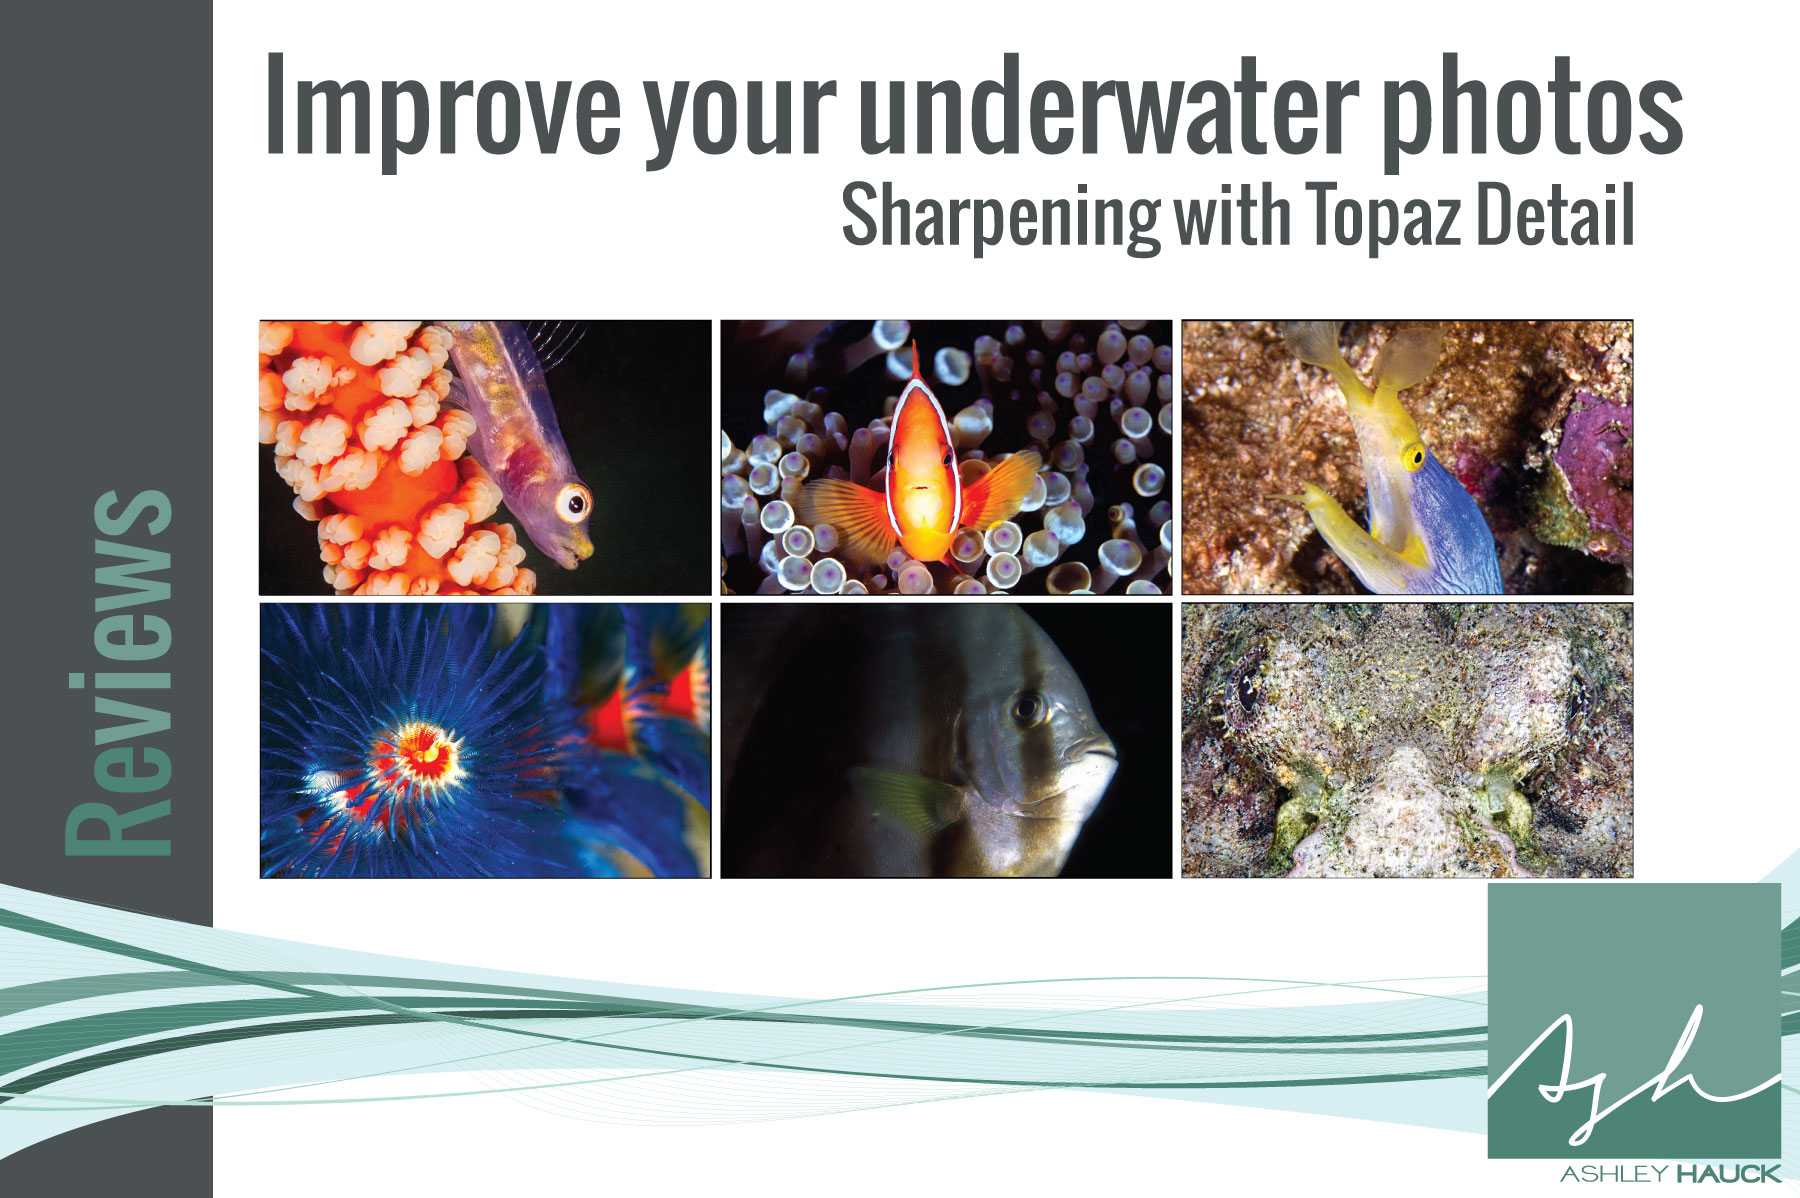 Topaz Detail for Underwater Photos: A Review